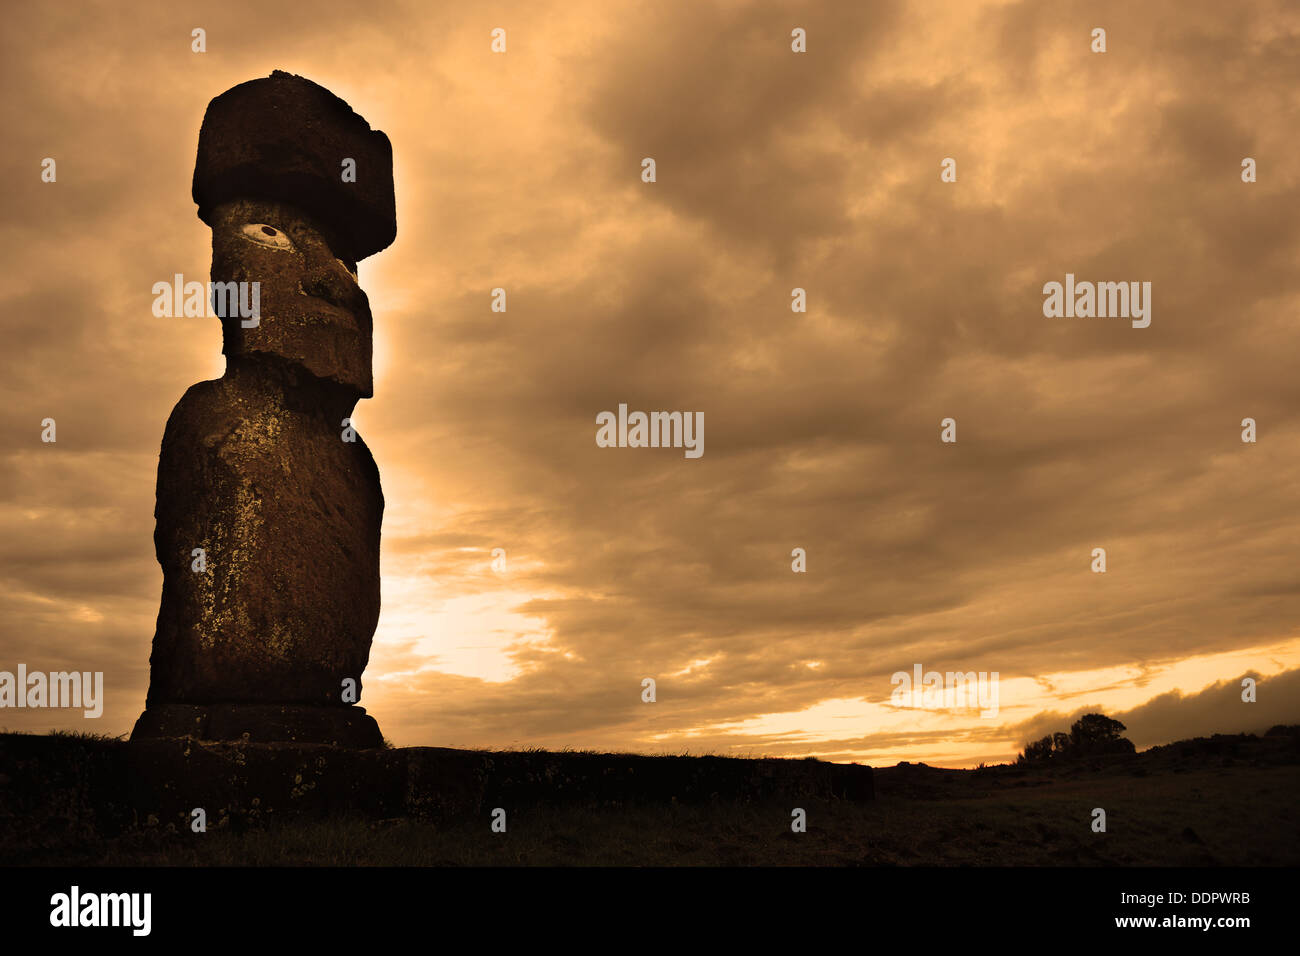 Moai monolithic human figures carved by the Rapa Nui on Easter Island Stock Photo